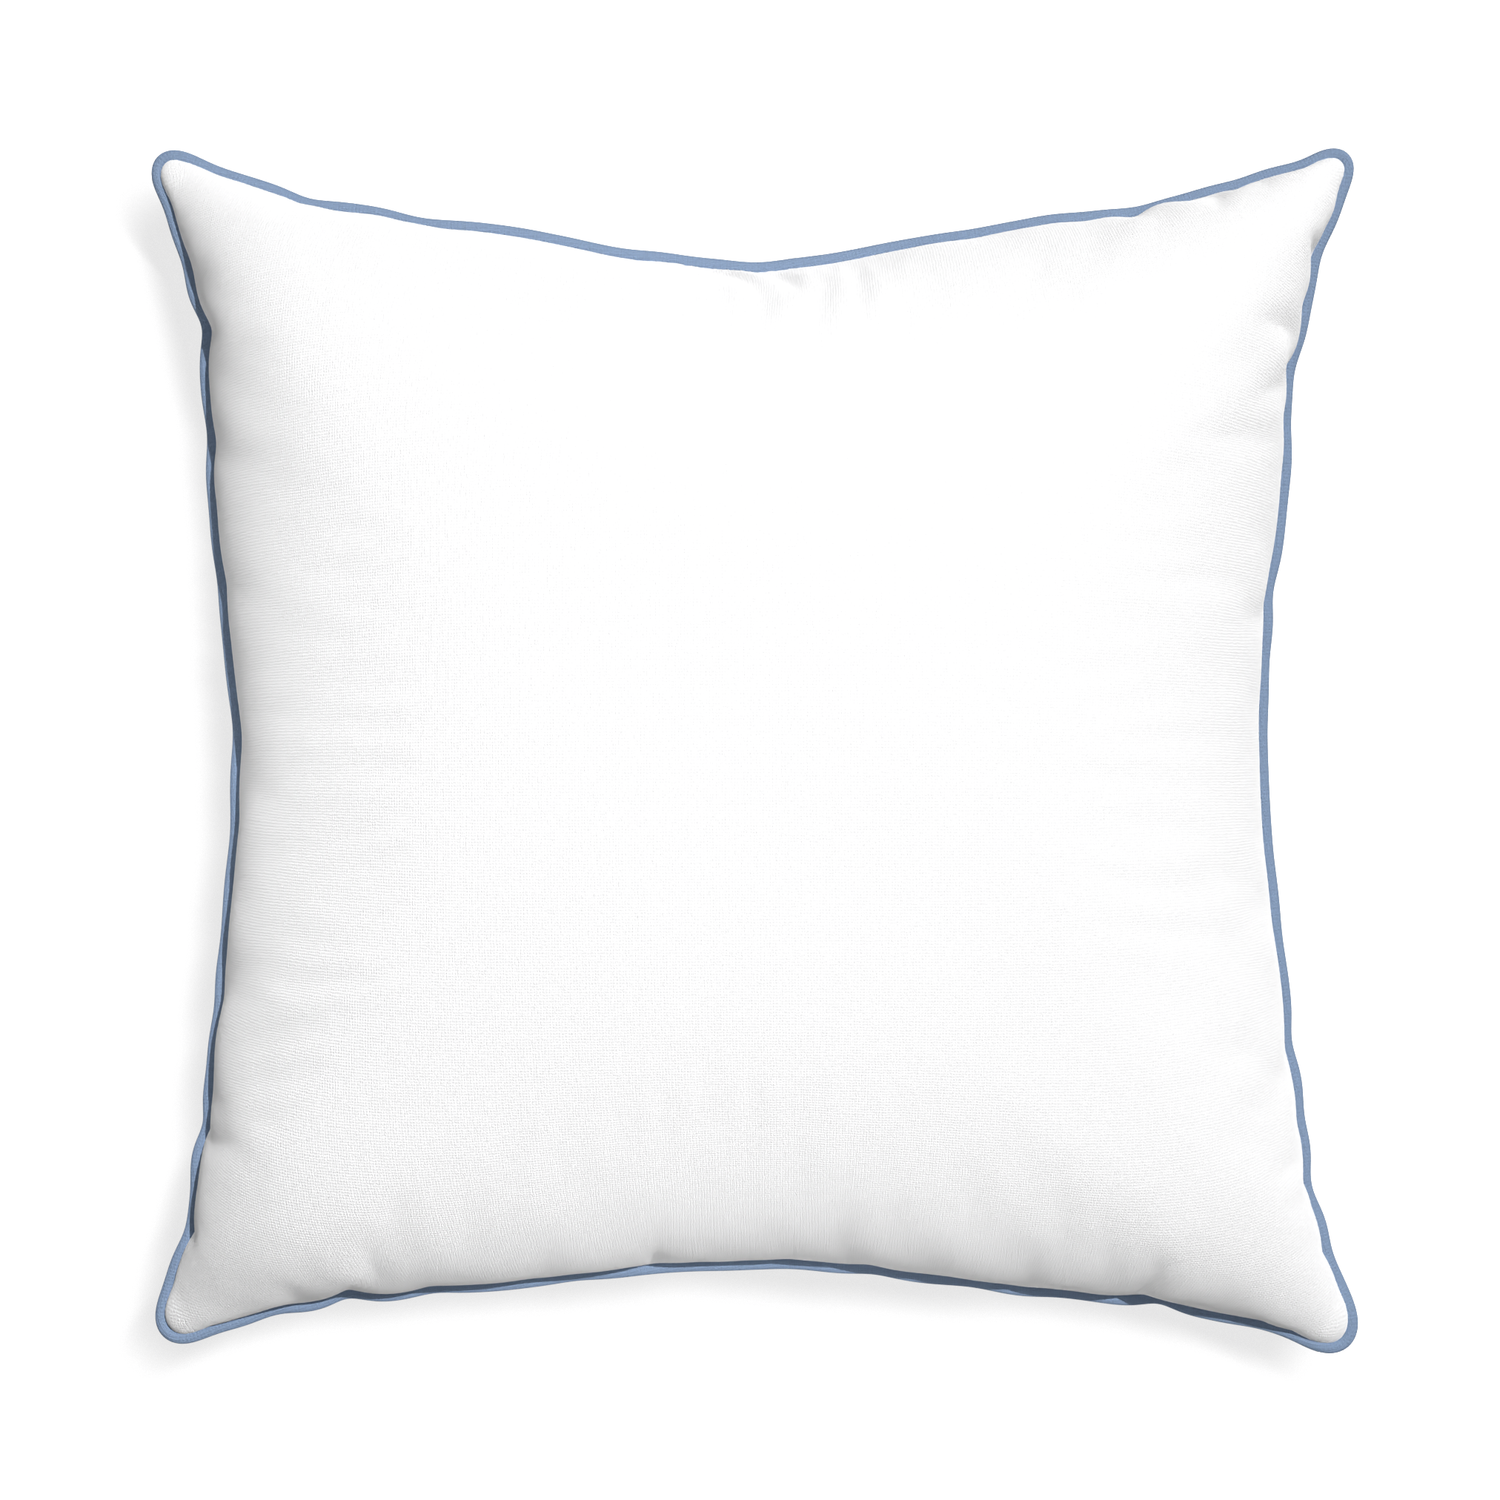 Euro-sham snow custom white cottonpillow with sky piping on white background